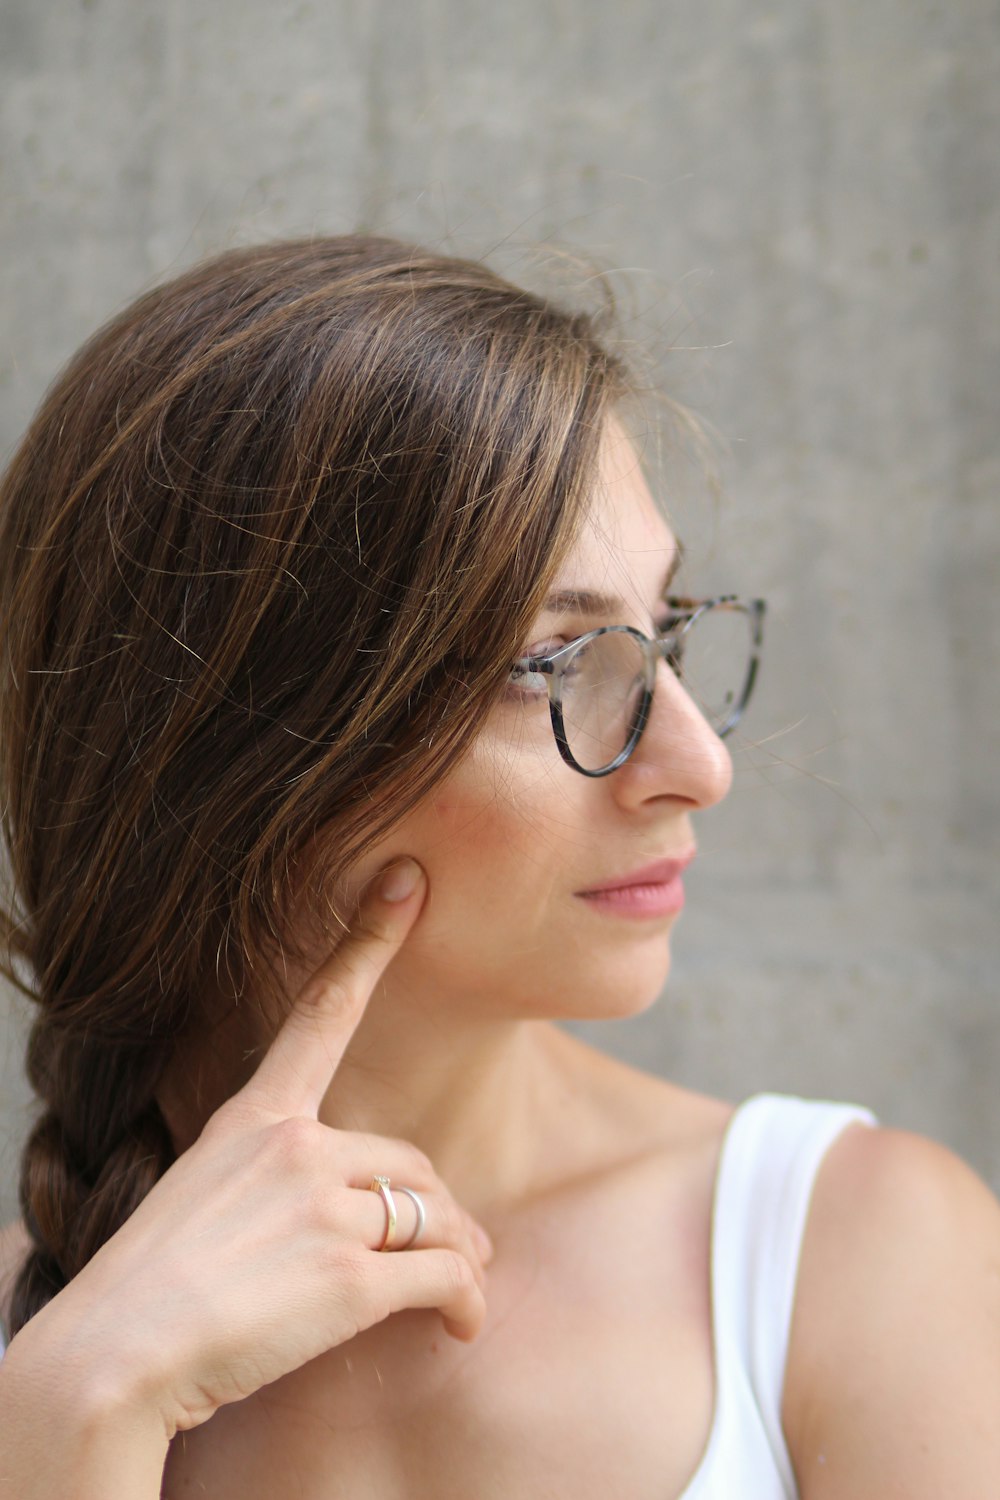 woman in eyeglasses and white sleeveless to